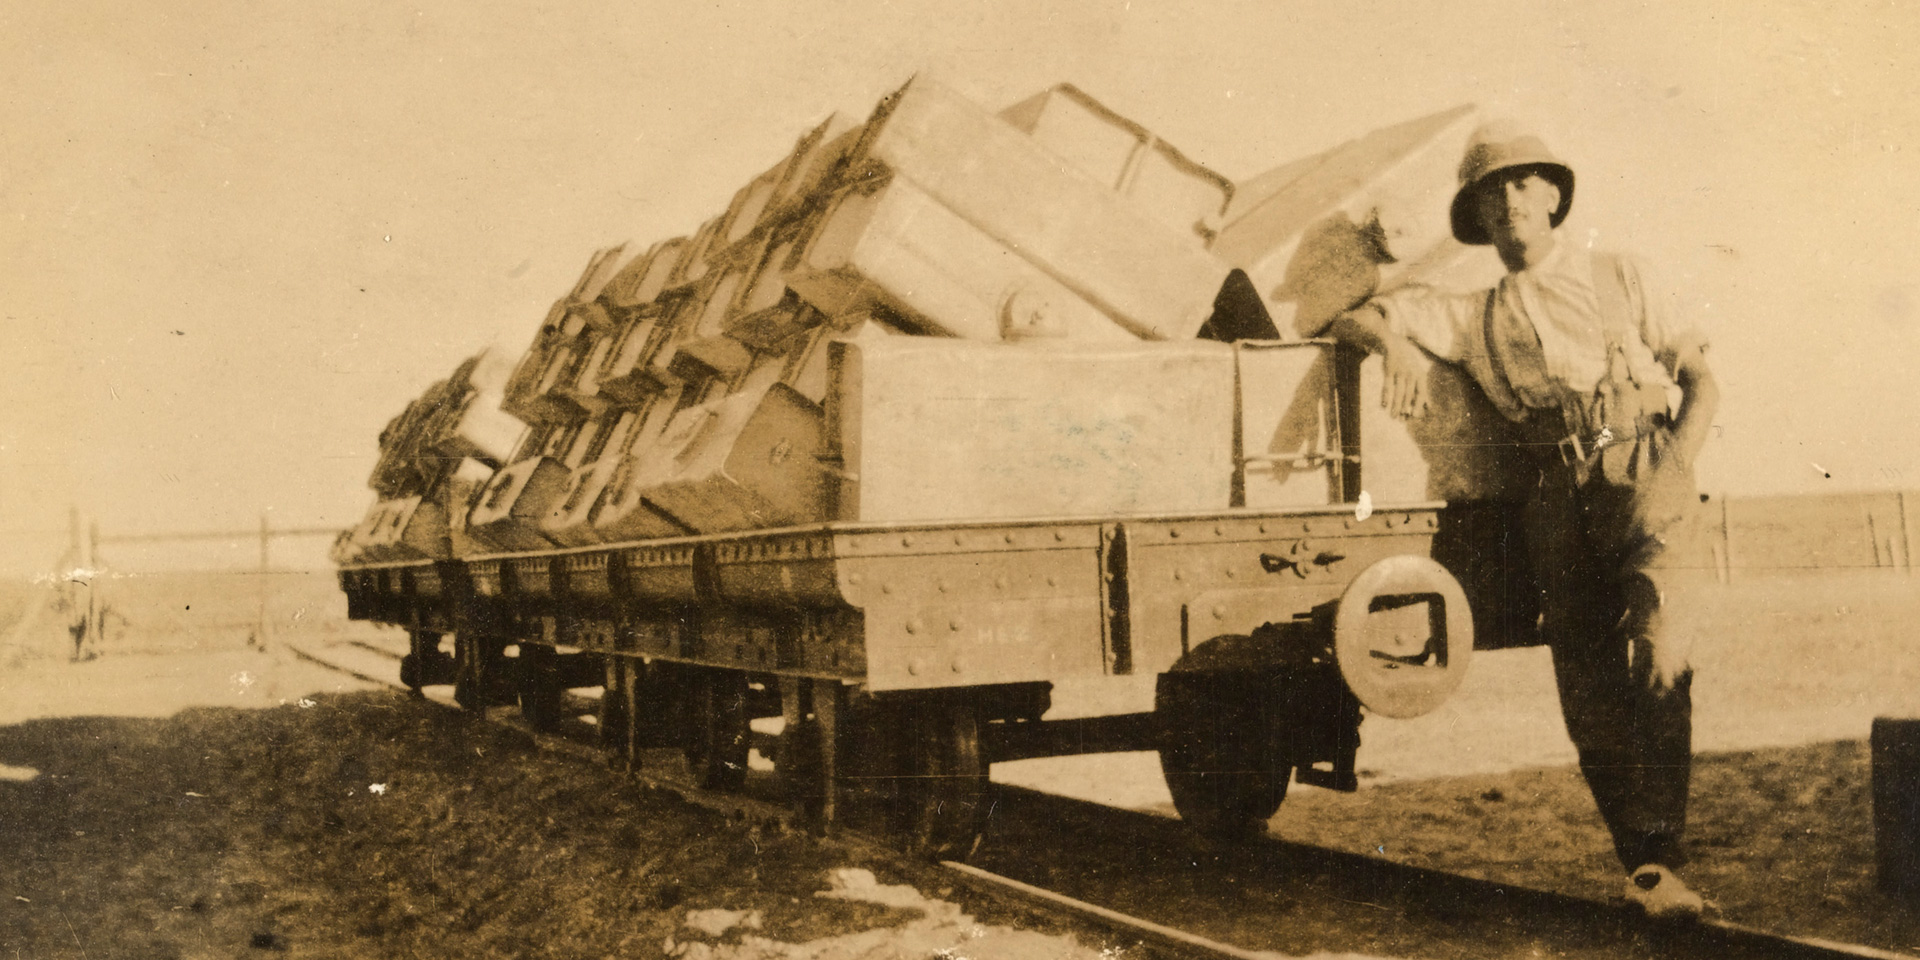 Corporal Joseph Egerton with a train truck of empty water tanks, Sinai, 1917